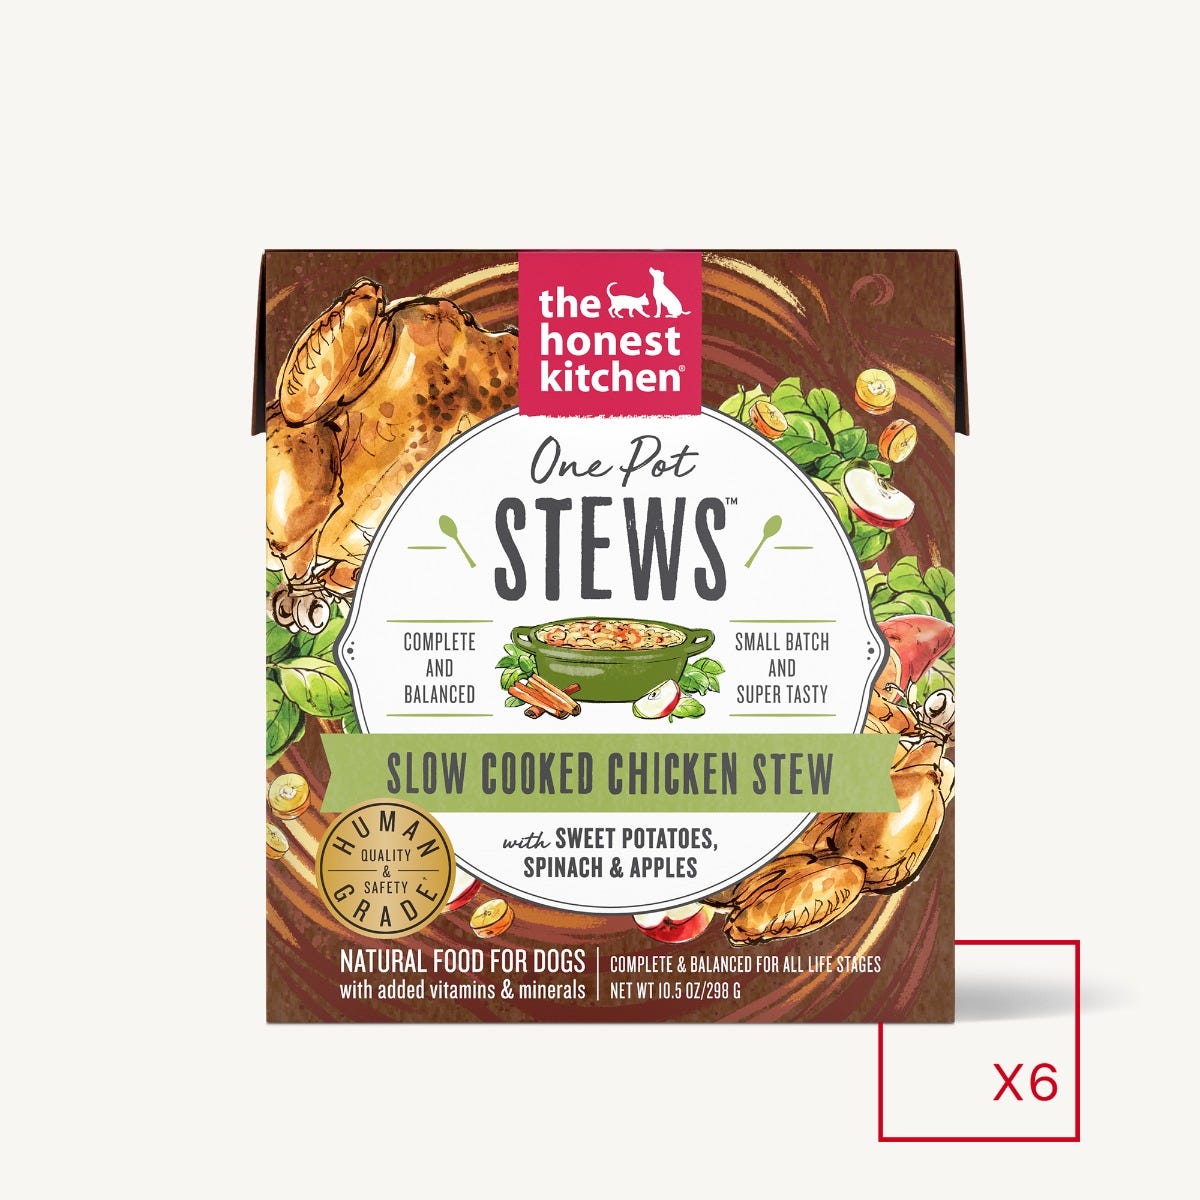 The Honest Kitchen -One Pot Stews - Slow Cooked Chicken with Sweet Potato, Spinach & Apples (Wet Dog Food)